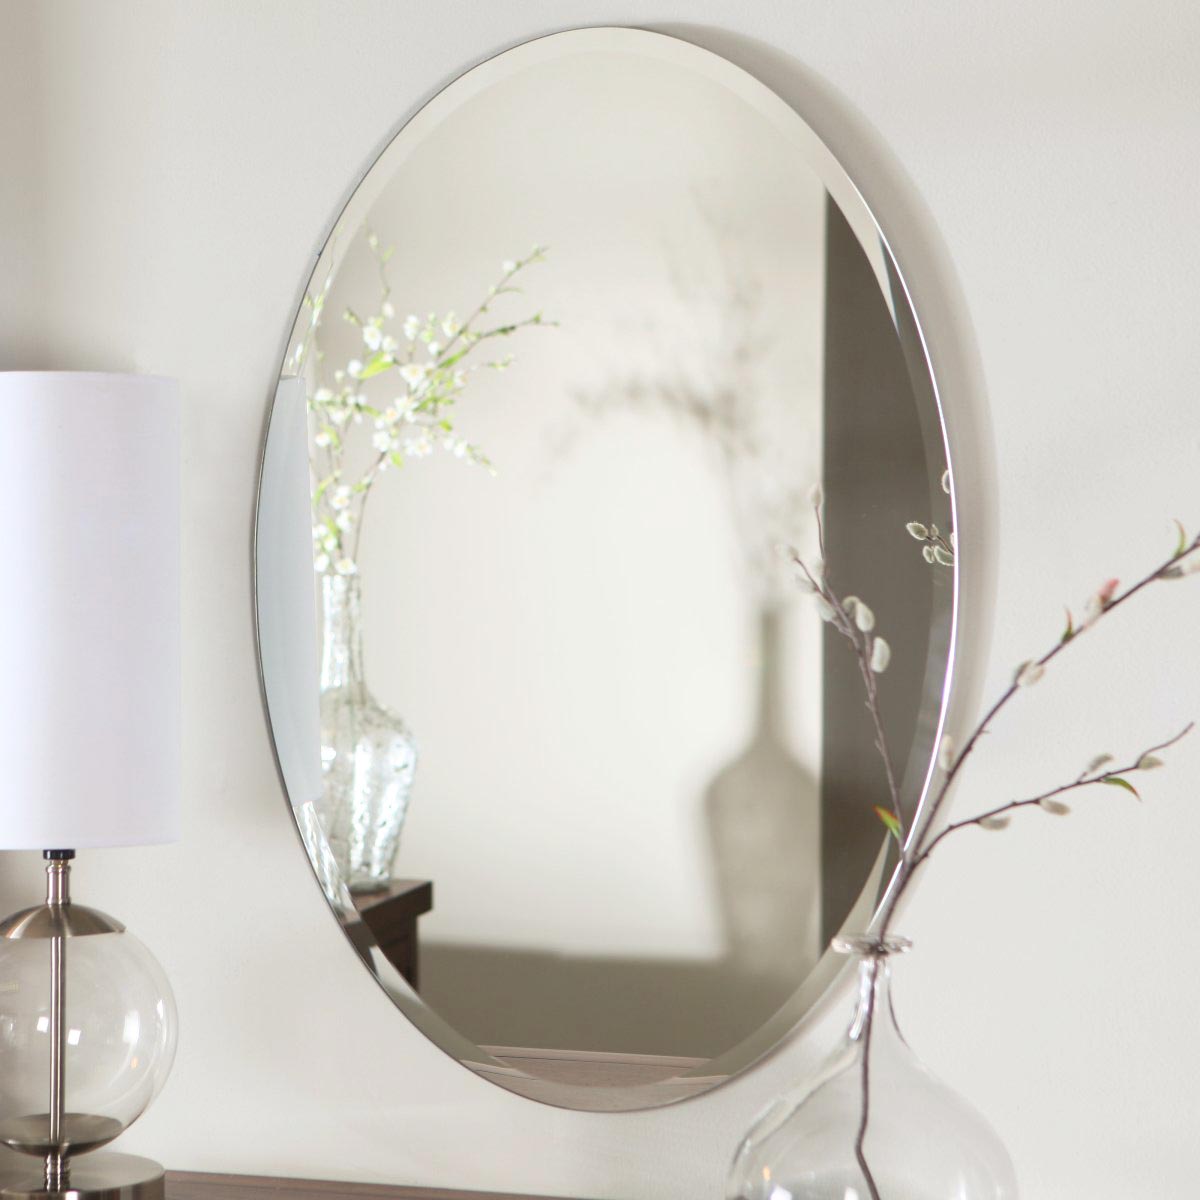 Excellent Beautiful Oval Bathroom Mirror Design Ideas High Class Quality Oval Mirror With Beautiful Pearl Stone Replica Handcraft Frame Beautiful Oval Bathroom Wall Mirror Bathroom